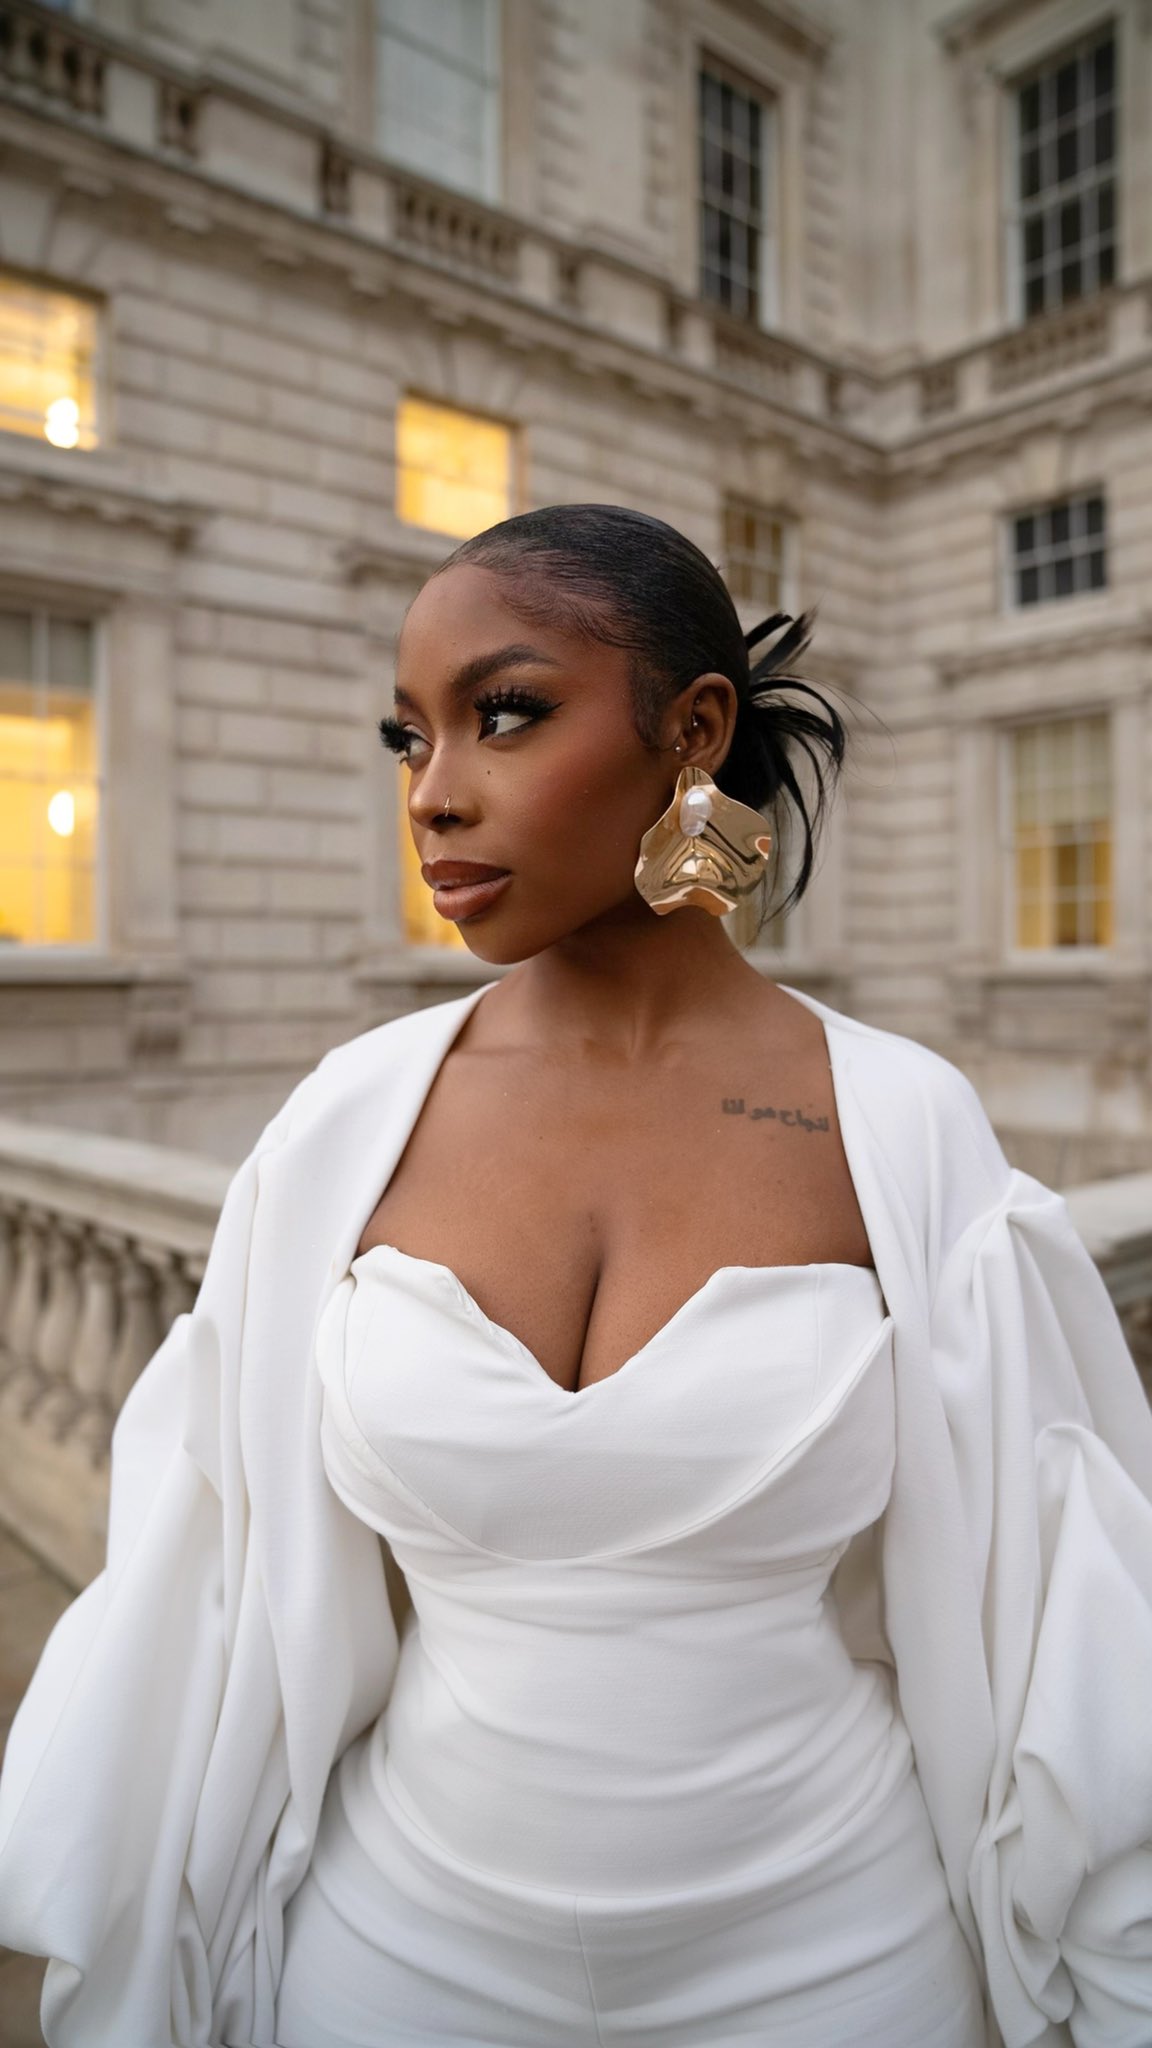 The 2022 MOBO Awards was a beautiful affair. It celebrated famous black British musicians and singers. The red carpet was filled with stunning looks. MOBO Awards wiki, MOBO Awards location, MOBO Awards founder, MOBO Awards 2022 photos, MOBO Awards 2022 location, MOBO Awards tickets, MOBO Awards 2022 tickets, MOBO Awards 2022 red carpet.